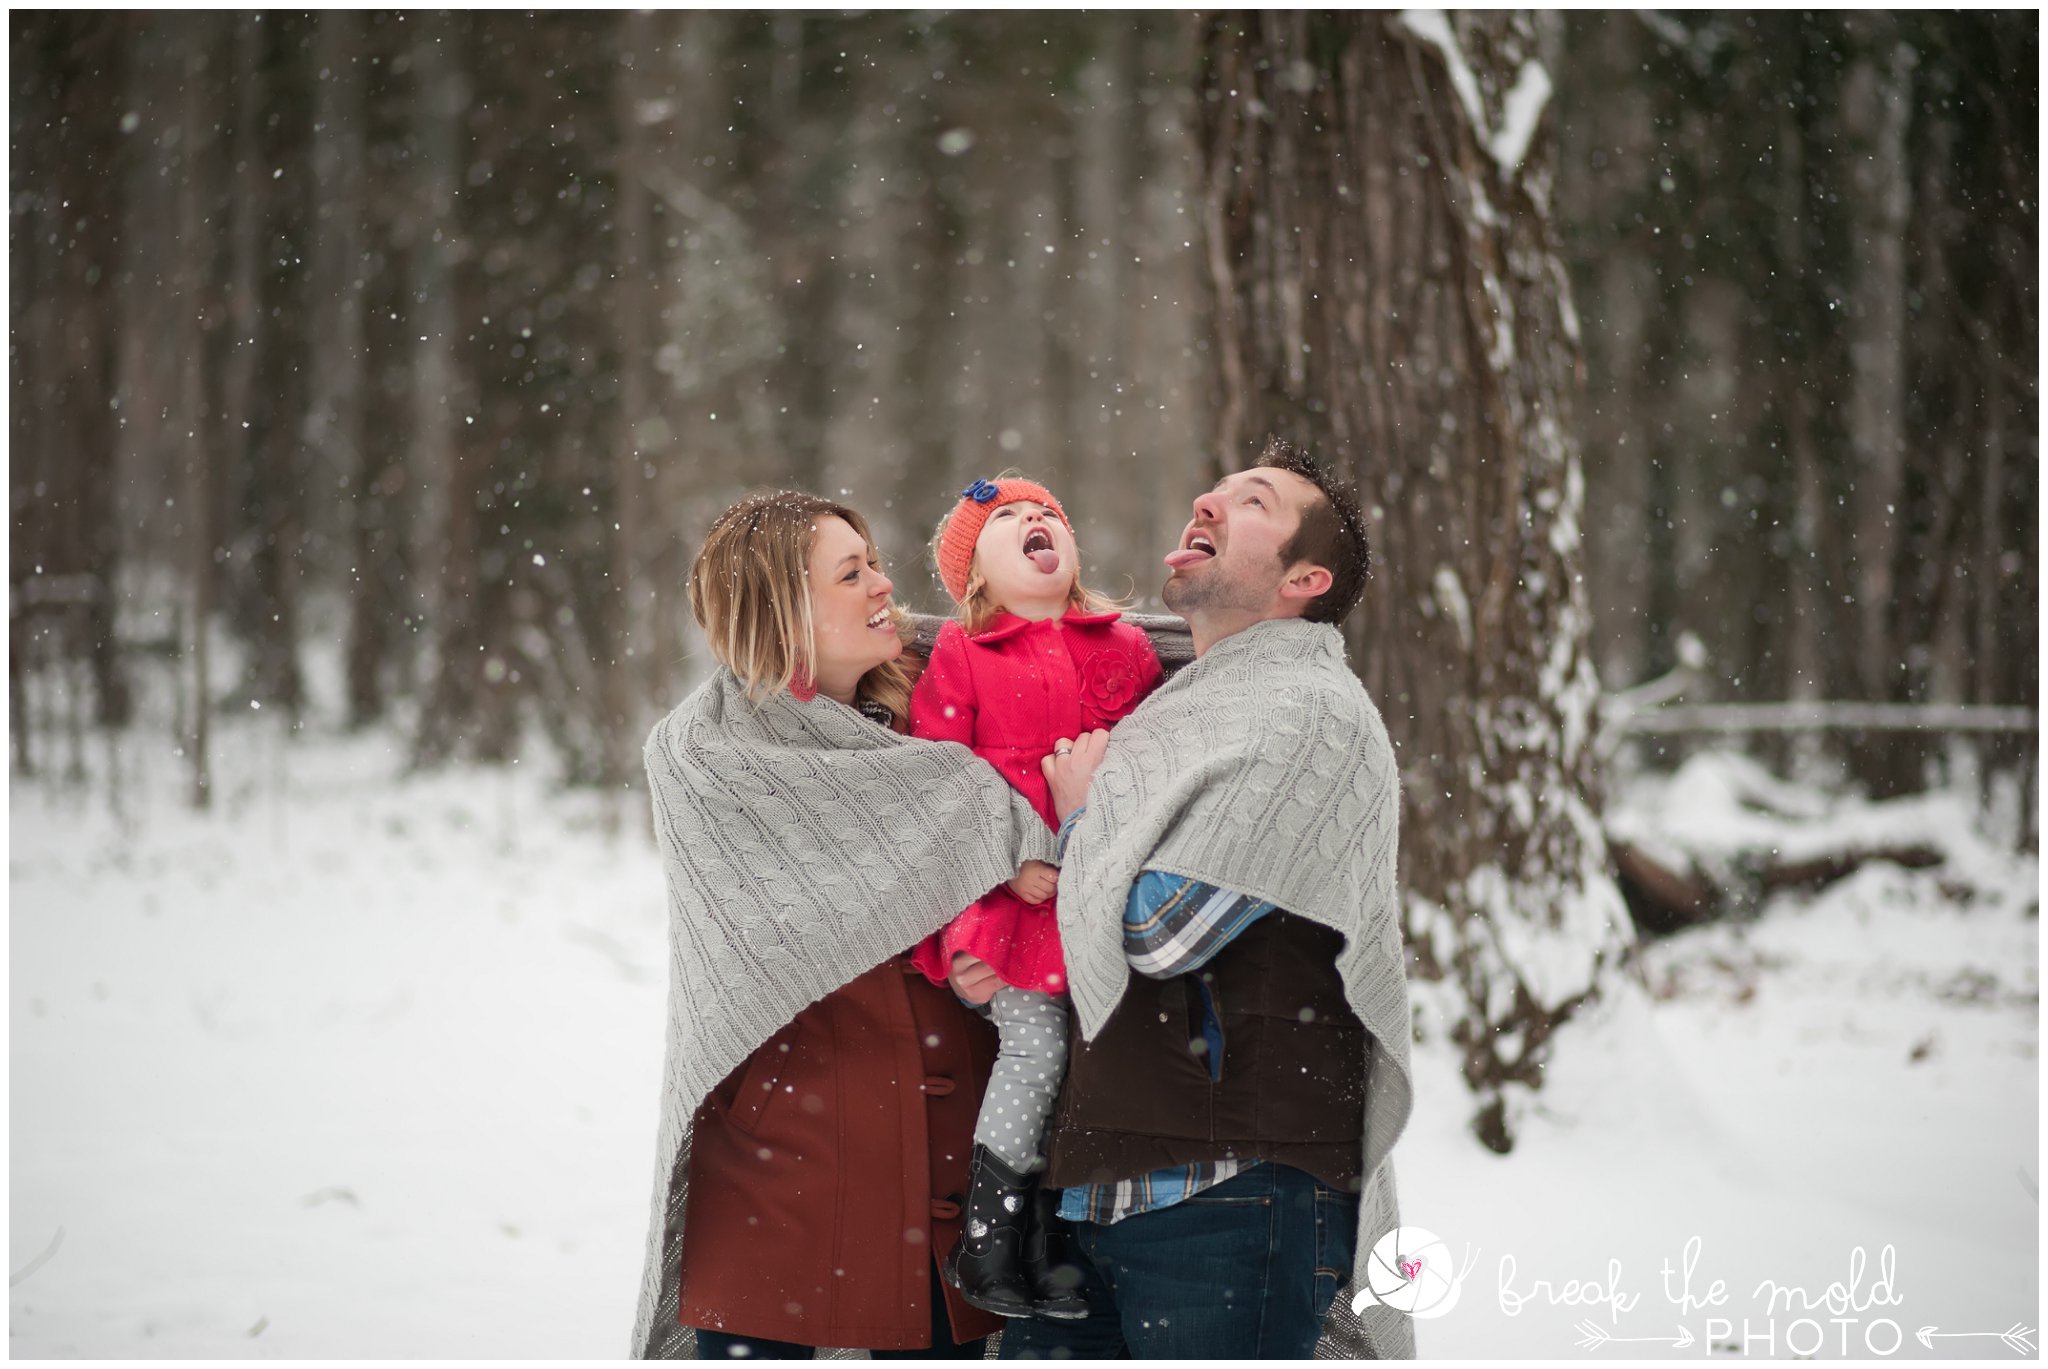 break-the-mold-photo-snowy-day-engagement-photos-knoxville-tn-tennessee-snow-day-pictures-winter-outdoor-unique-family_1523.jpg